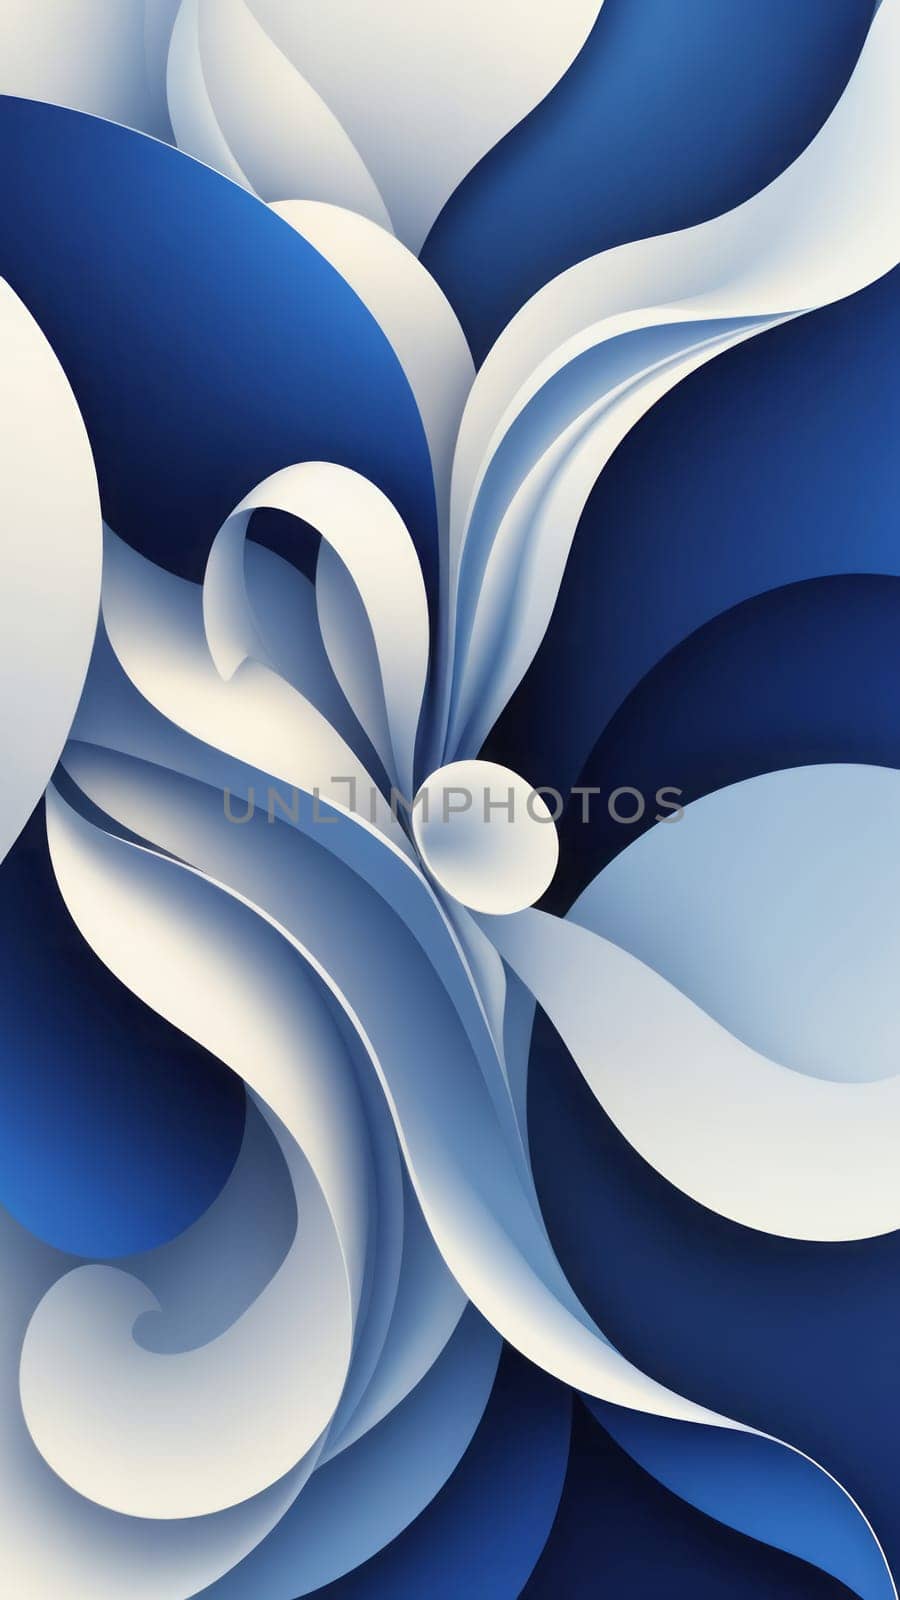 Screen background from Sigmoid shapes and navy by nkotlyar